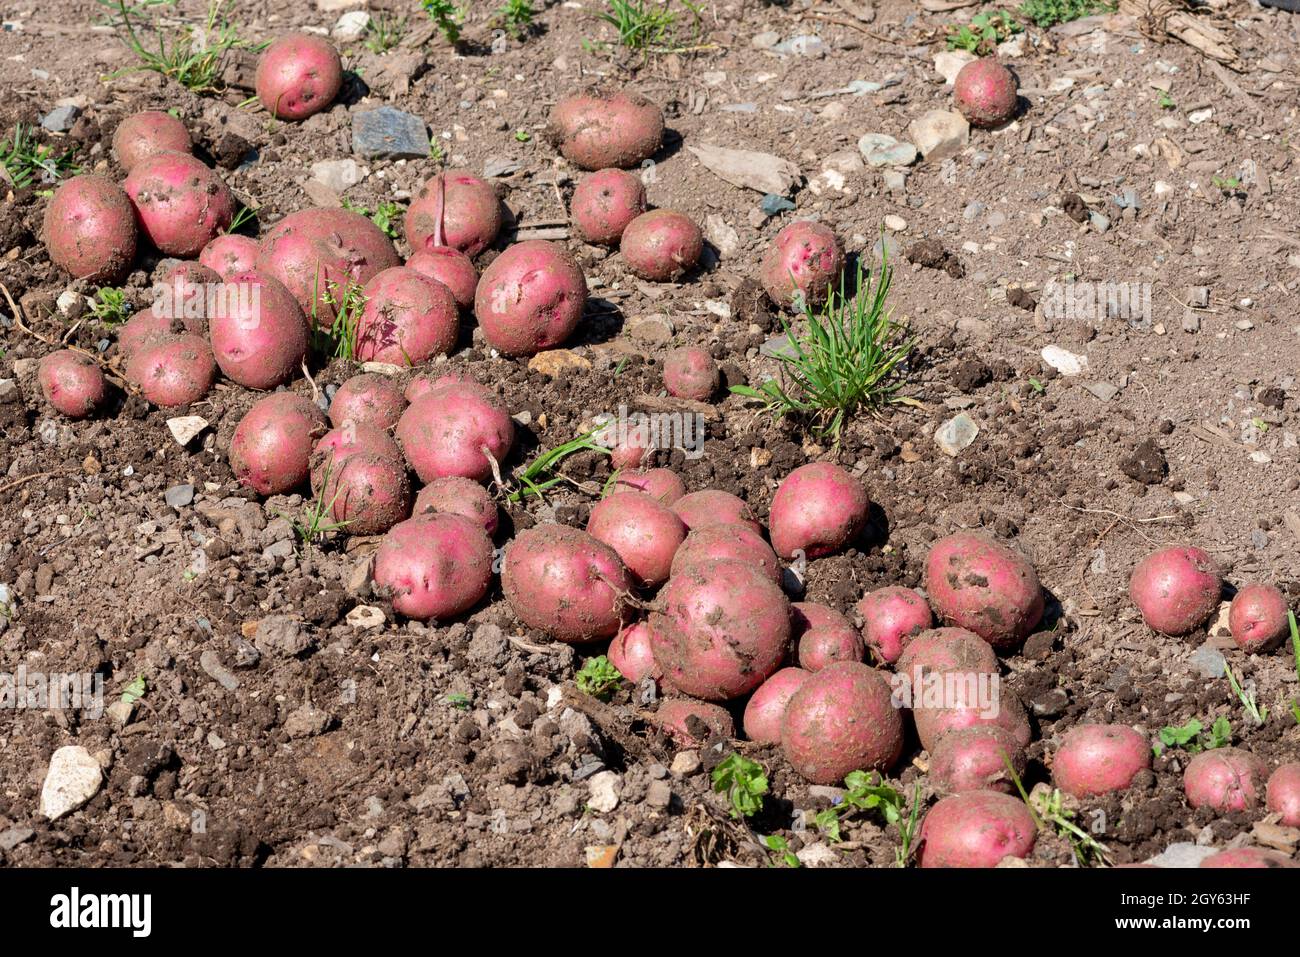 A closeup of a large collection of fresh cleaned new red potatoes. The organic vegetable is raw with the sun shining on their thin layers of skin. Stock Photo